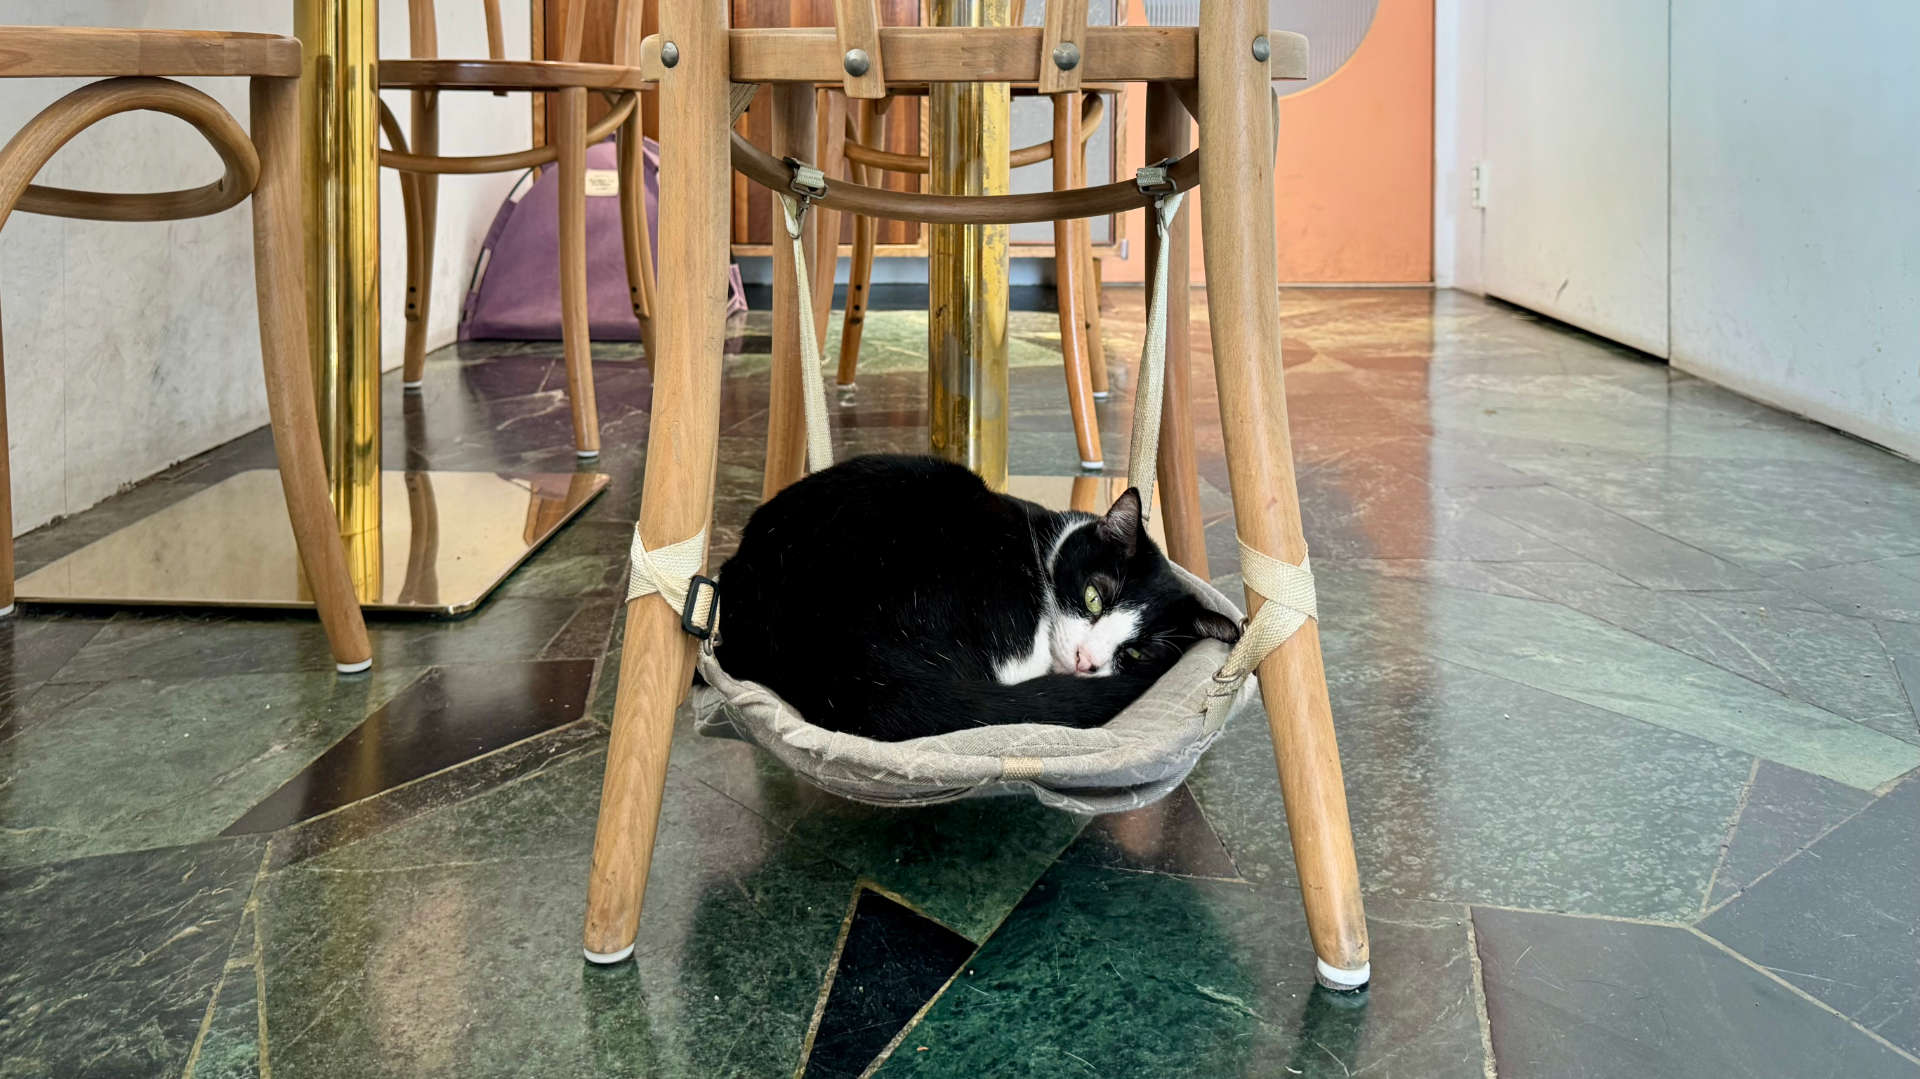 A cat curled up in a hammock, suspended between the four legs of a dining chair.